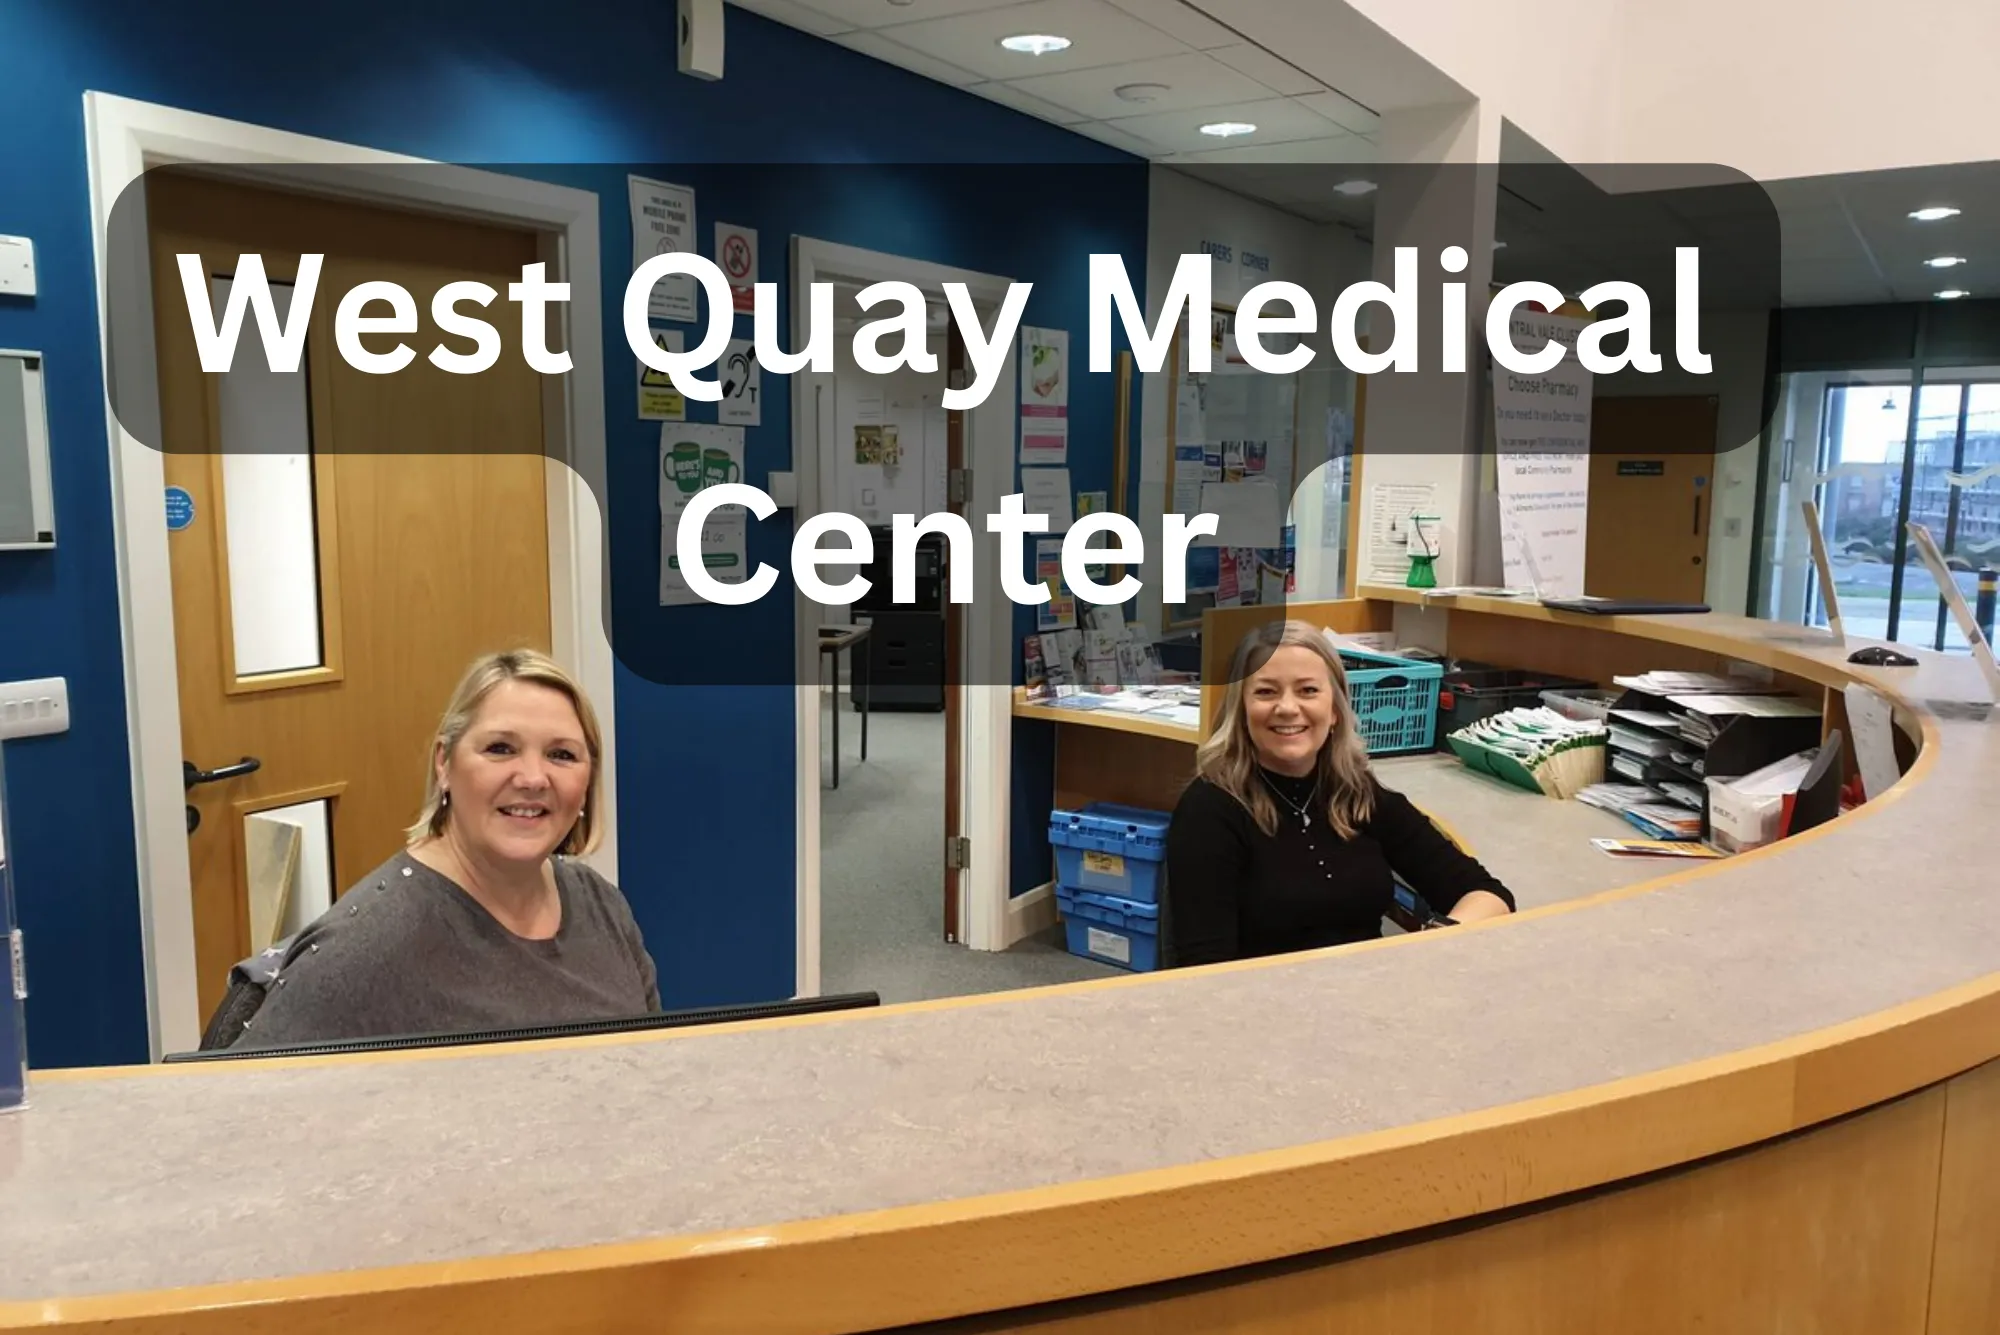 Explore Excellence in Healthcare at West Quay Medical Center